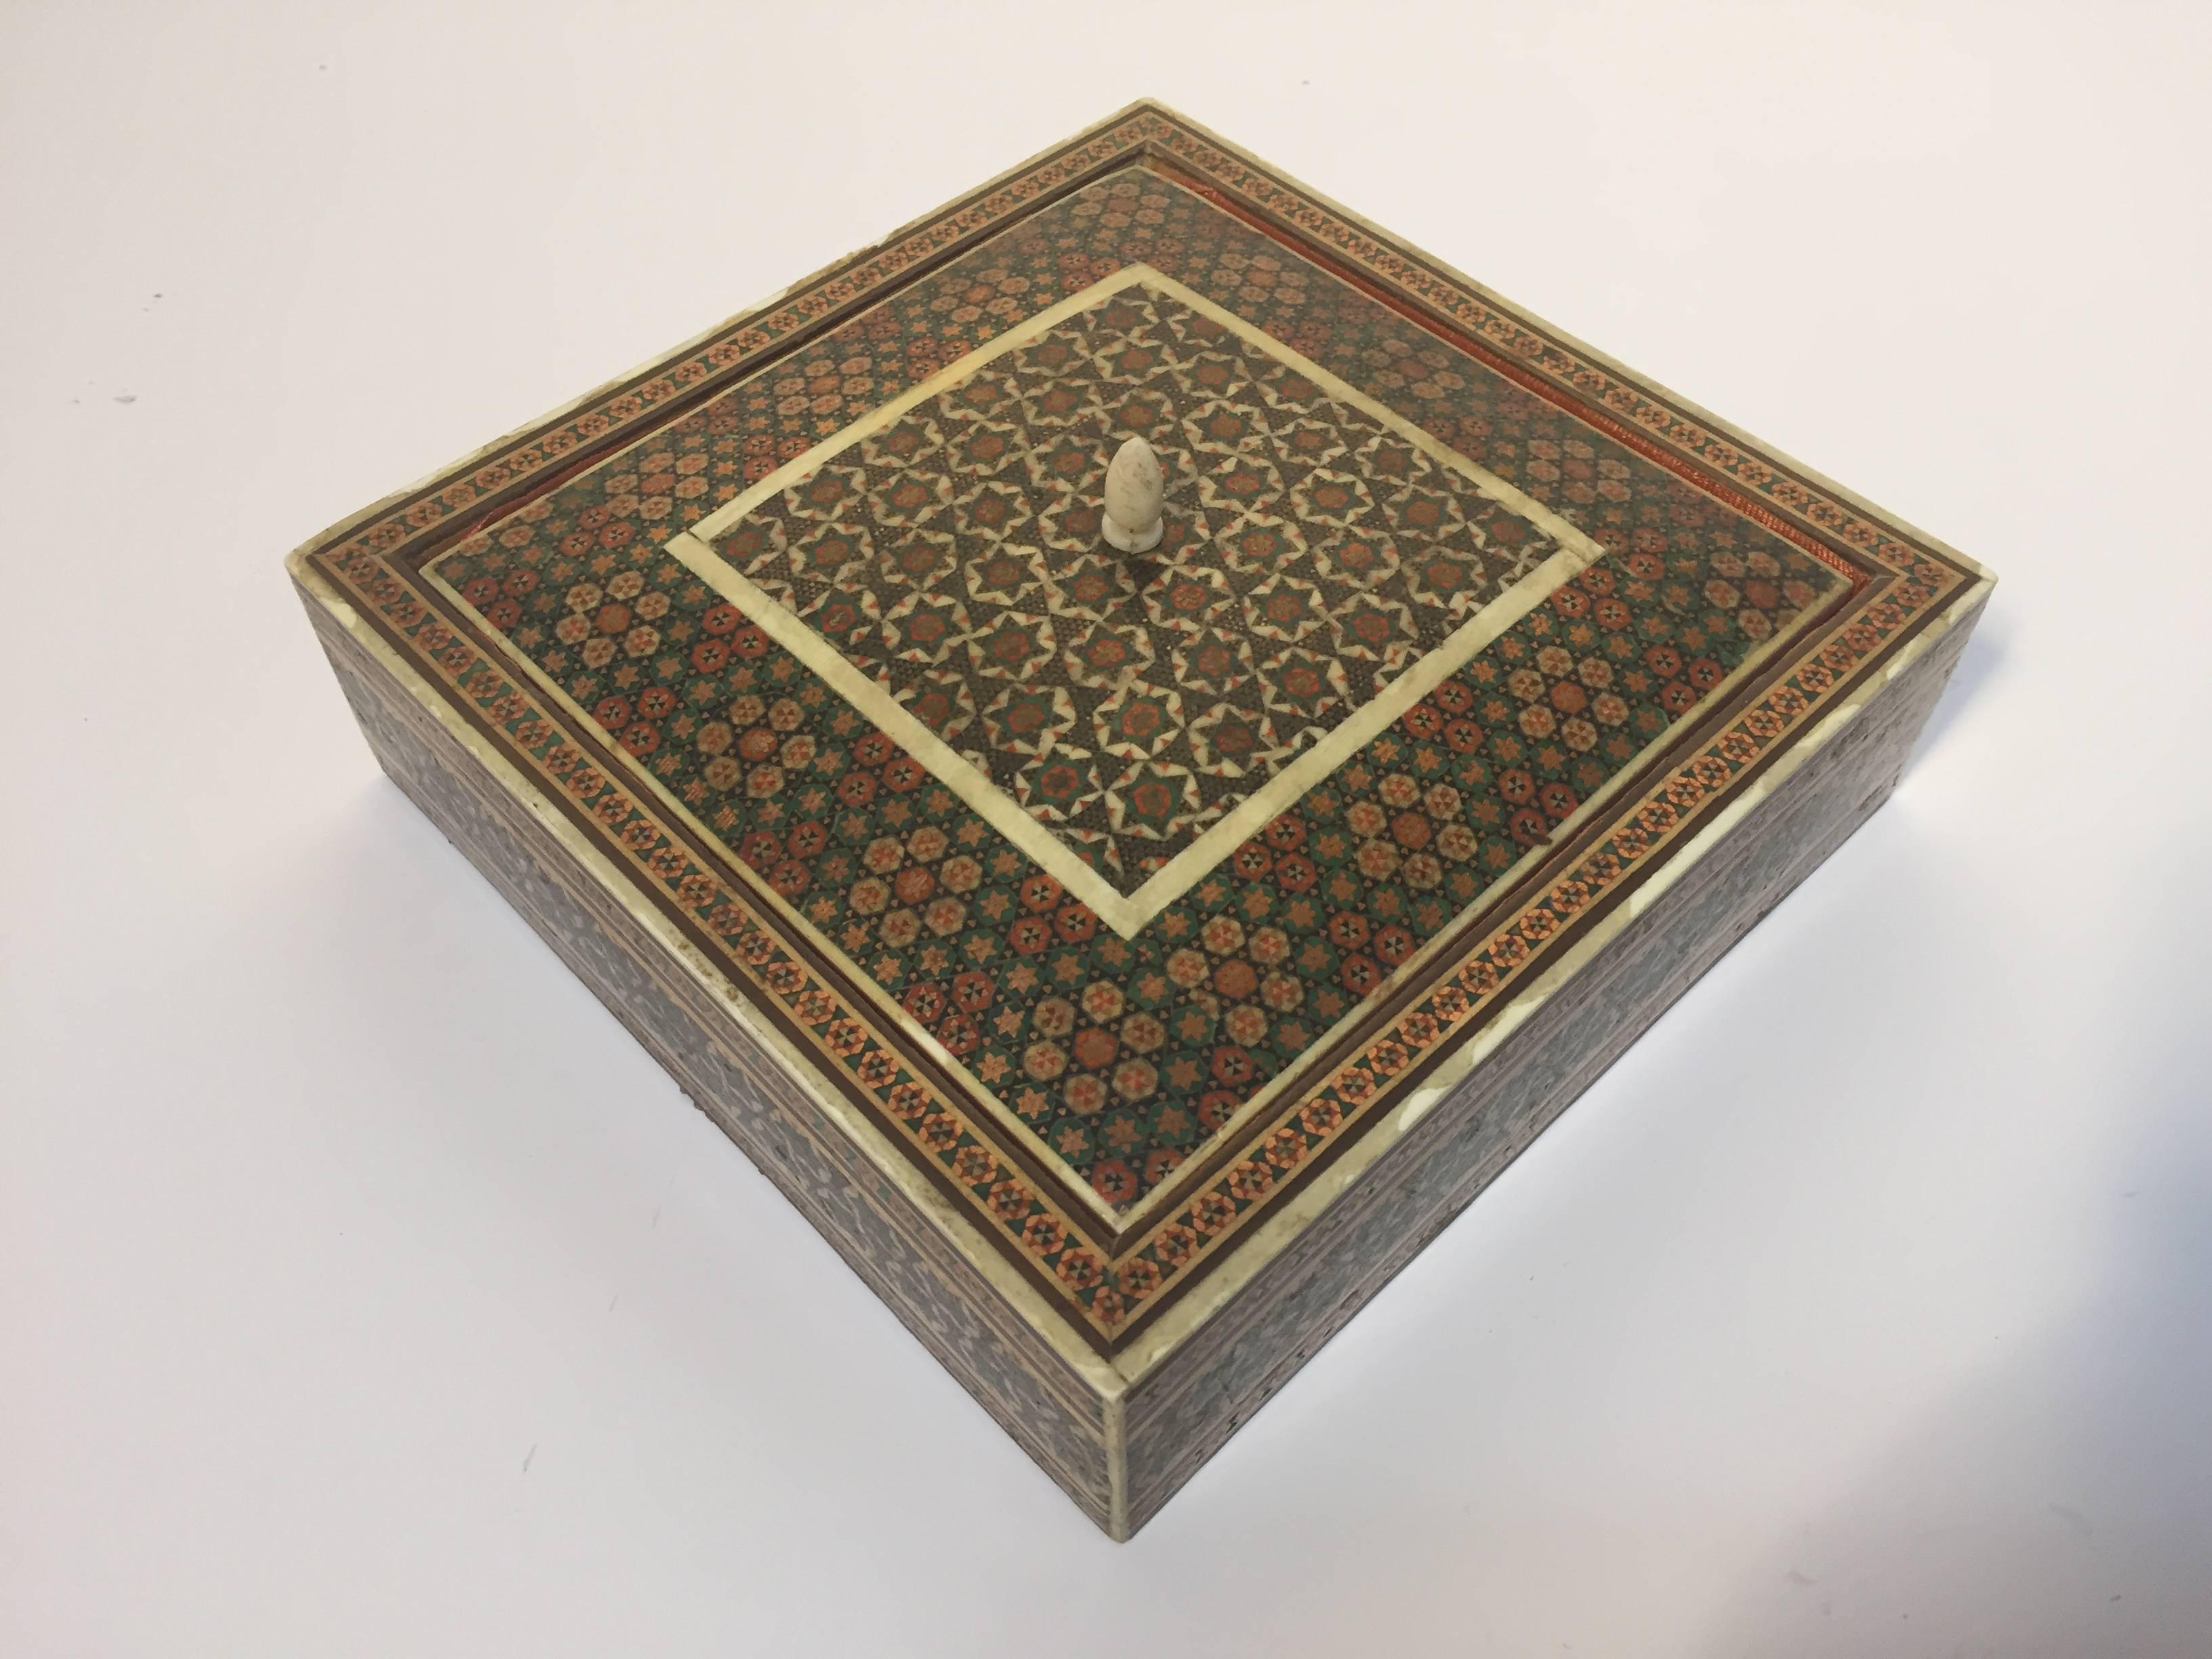 Anglo-Indian square micro mosaic inlaid jewelry box with lid.
Intricate inlaid Anglo-Indian British Colonial box with floral and geometric design.
Red velvet lined with glass.
Anglo-Indian Colonial bone inlay and marquetry, very fine